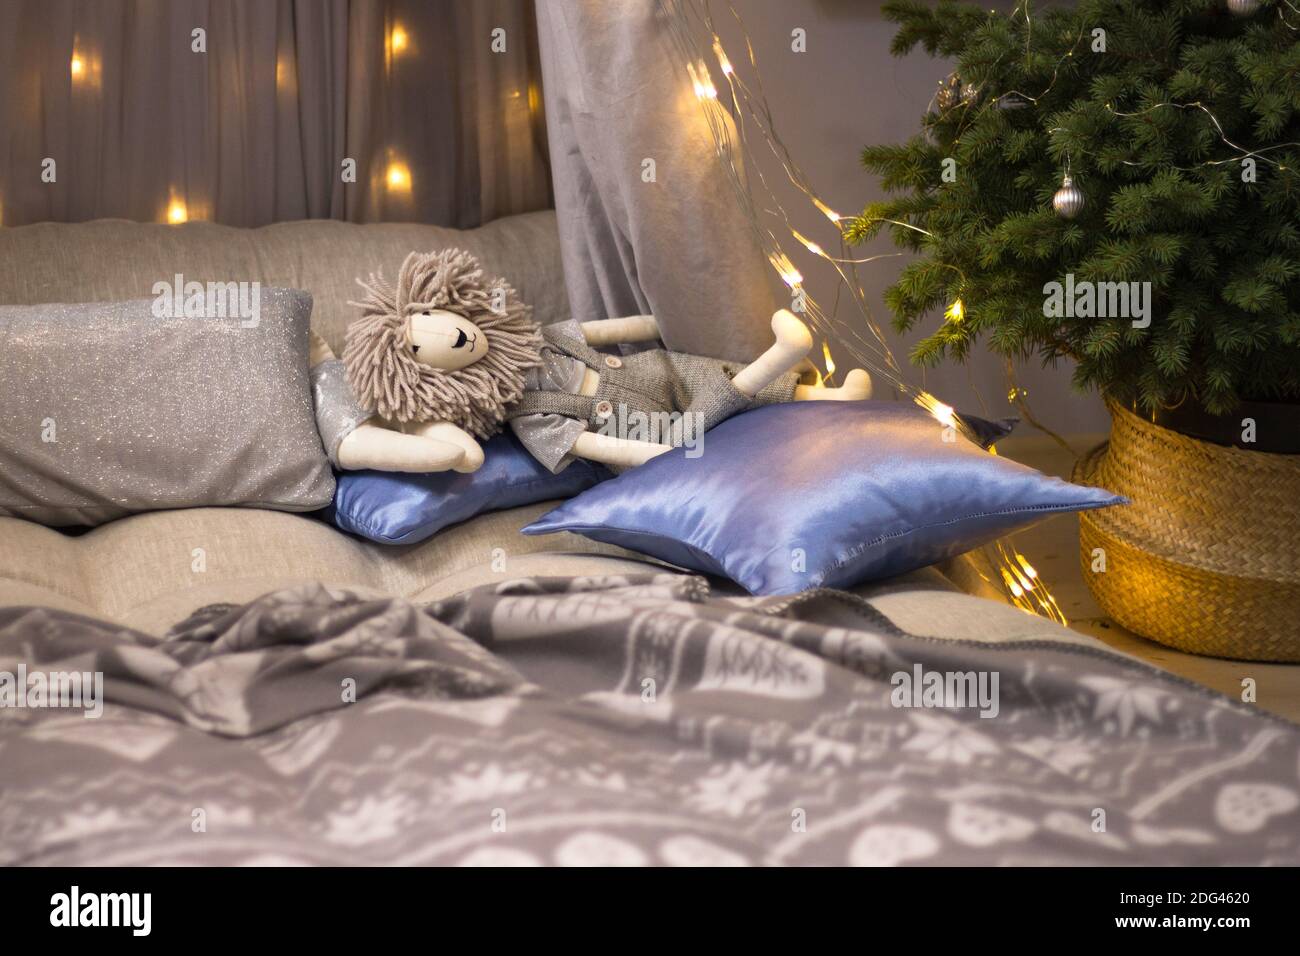 Toy lion resting on pillows on a child bed with a canopy decorated with lights and a Christmas tree Stock Photo